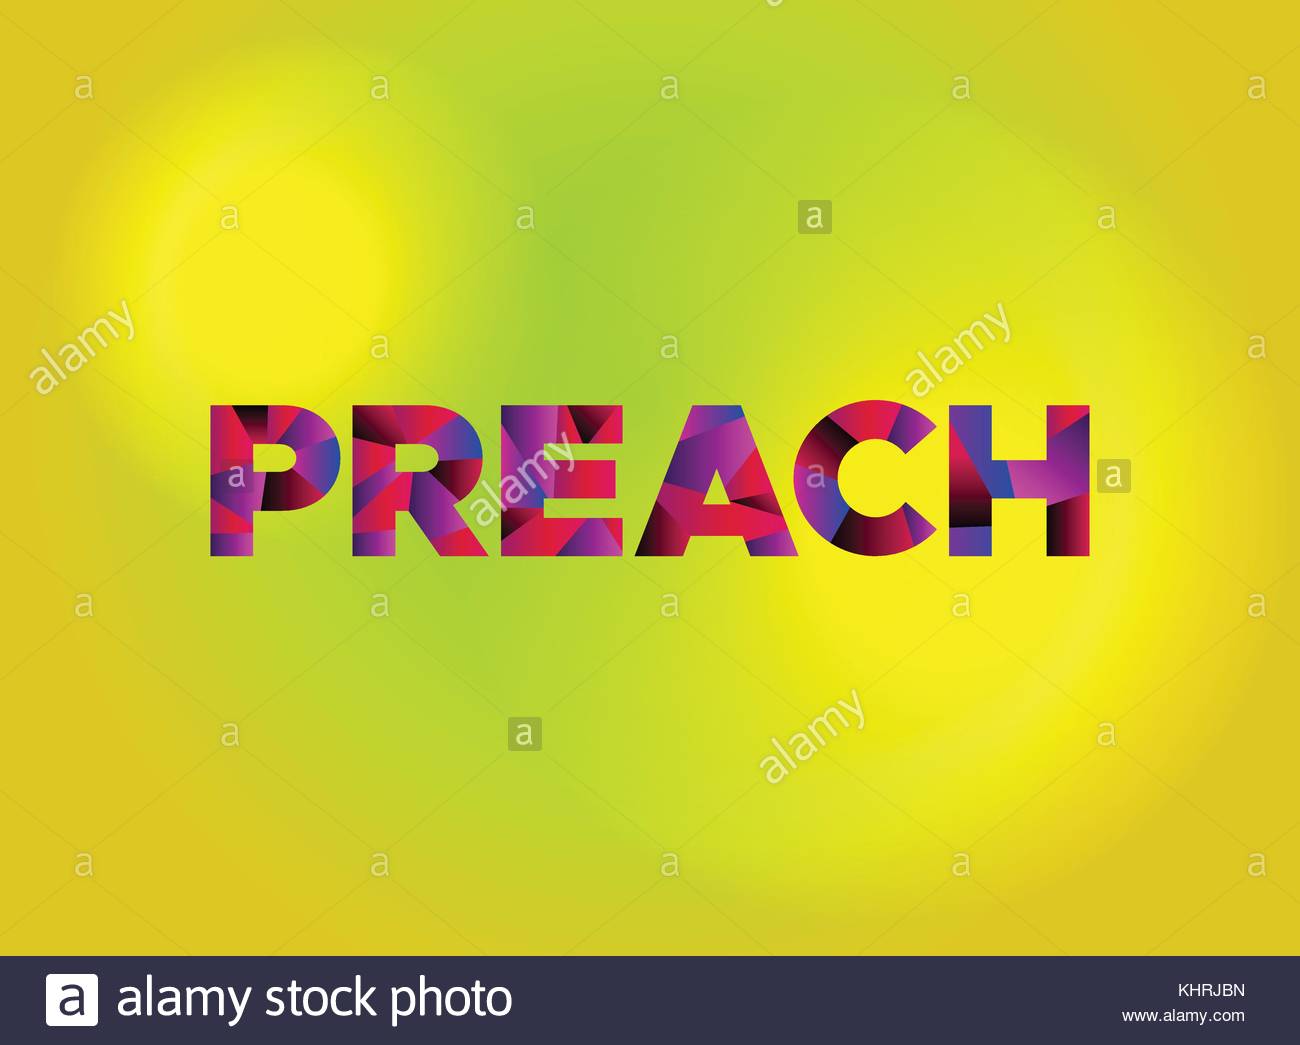 The Word Preach Written In Colorful Fragmented Art On A